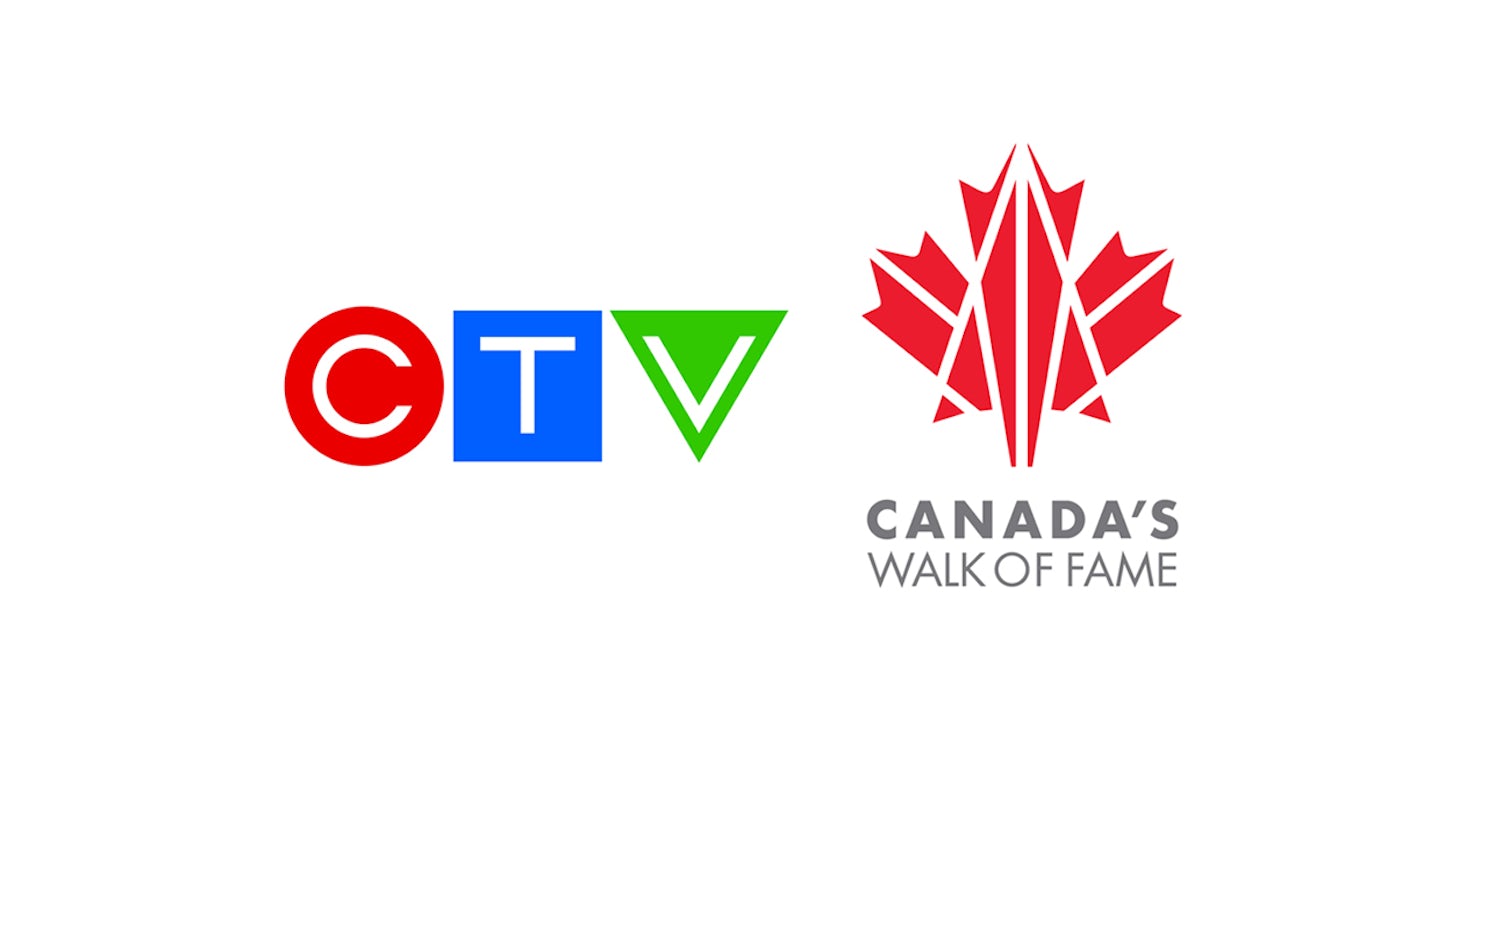 CTV Partners with CANADA’S WALK OF FAME as Official Broadcaster of